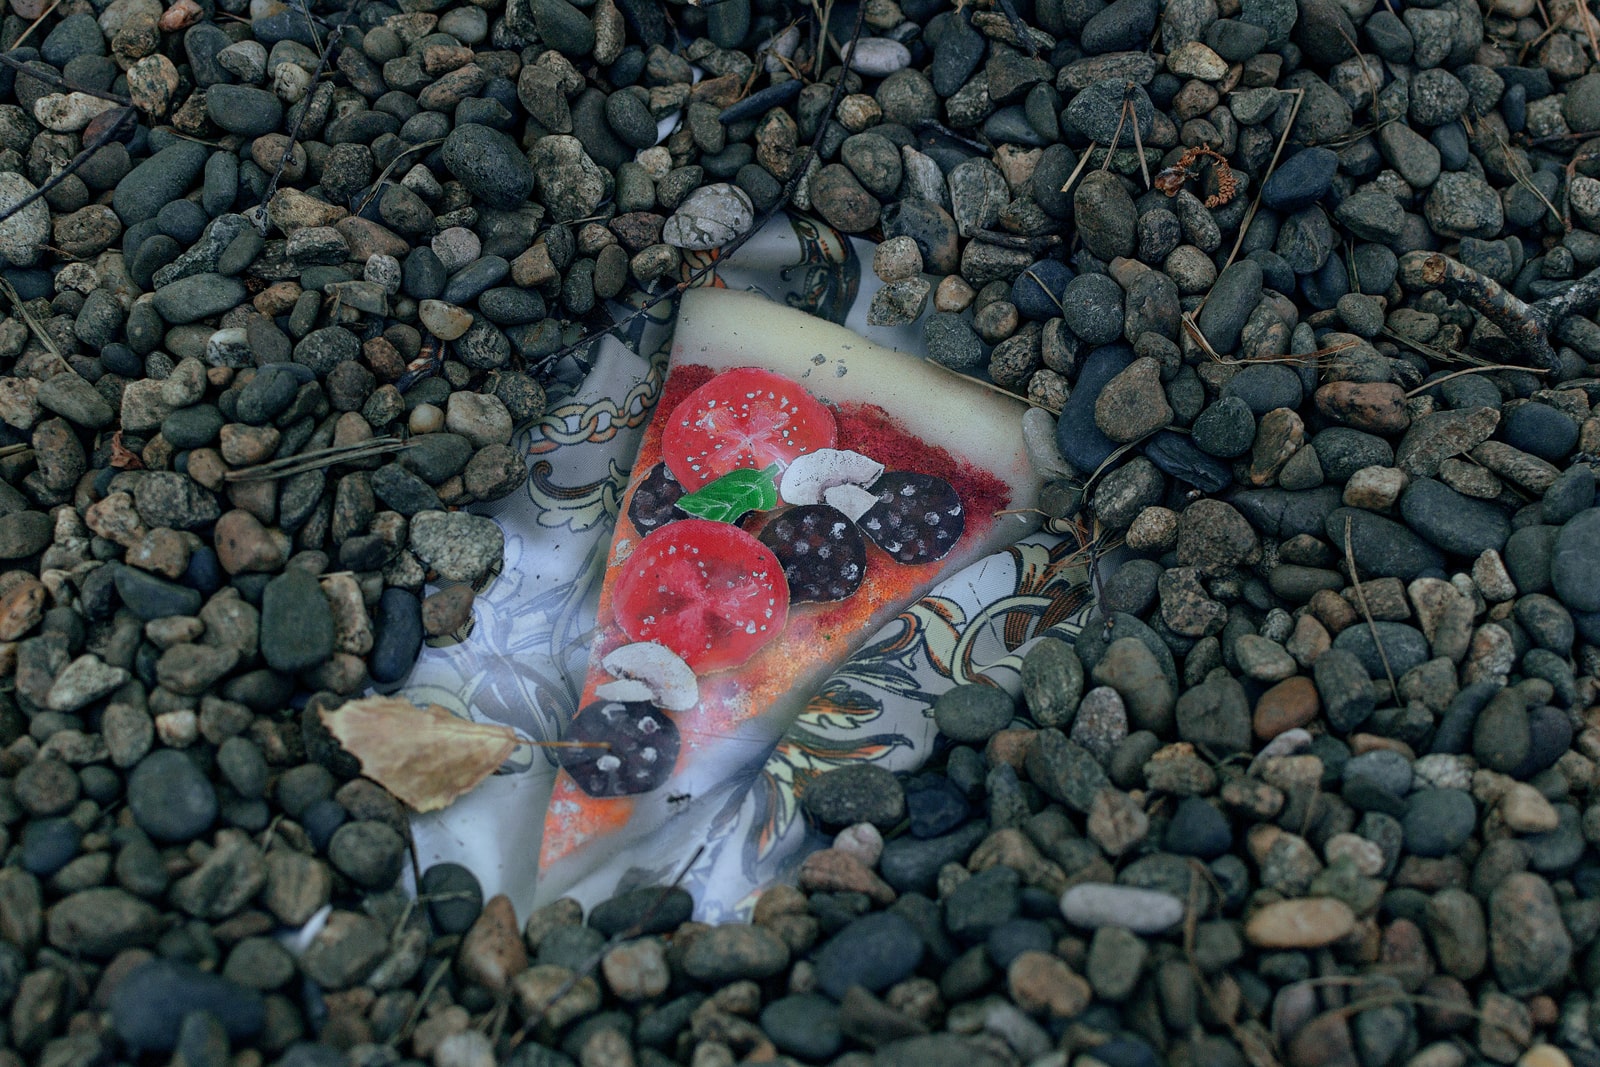 Sekretik in the form of a pizza made of fabric and foam rubber in pebble stones under glass. Created by the girls creative cooperative Businki, 2020. Sekretiki (“little secrets”) is a children’s game, where small objects are covered with glass and buried